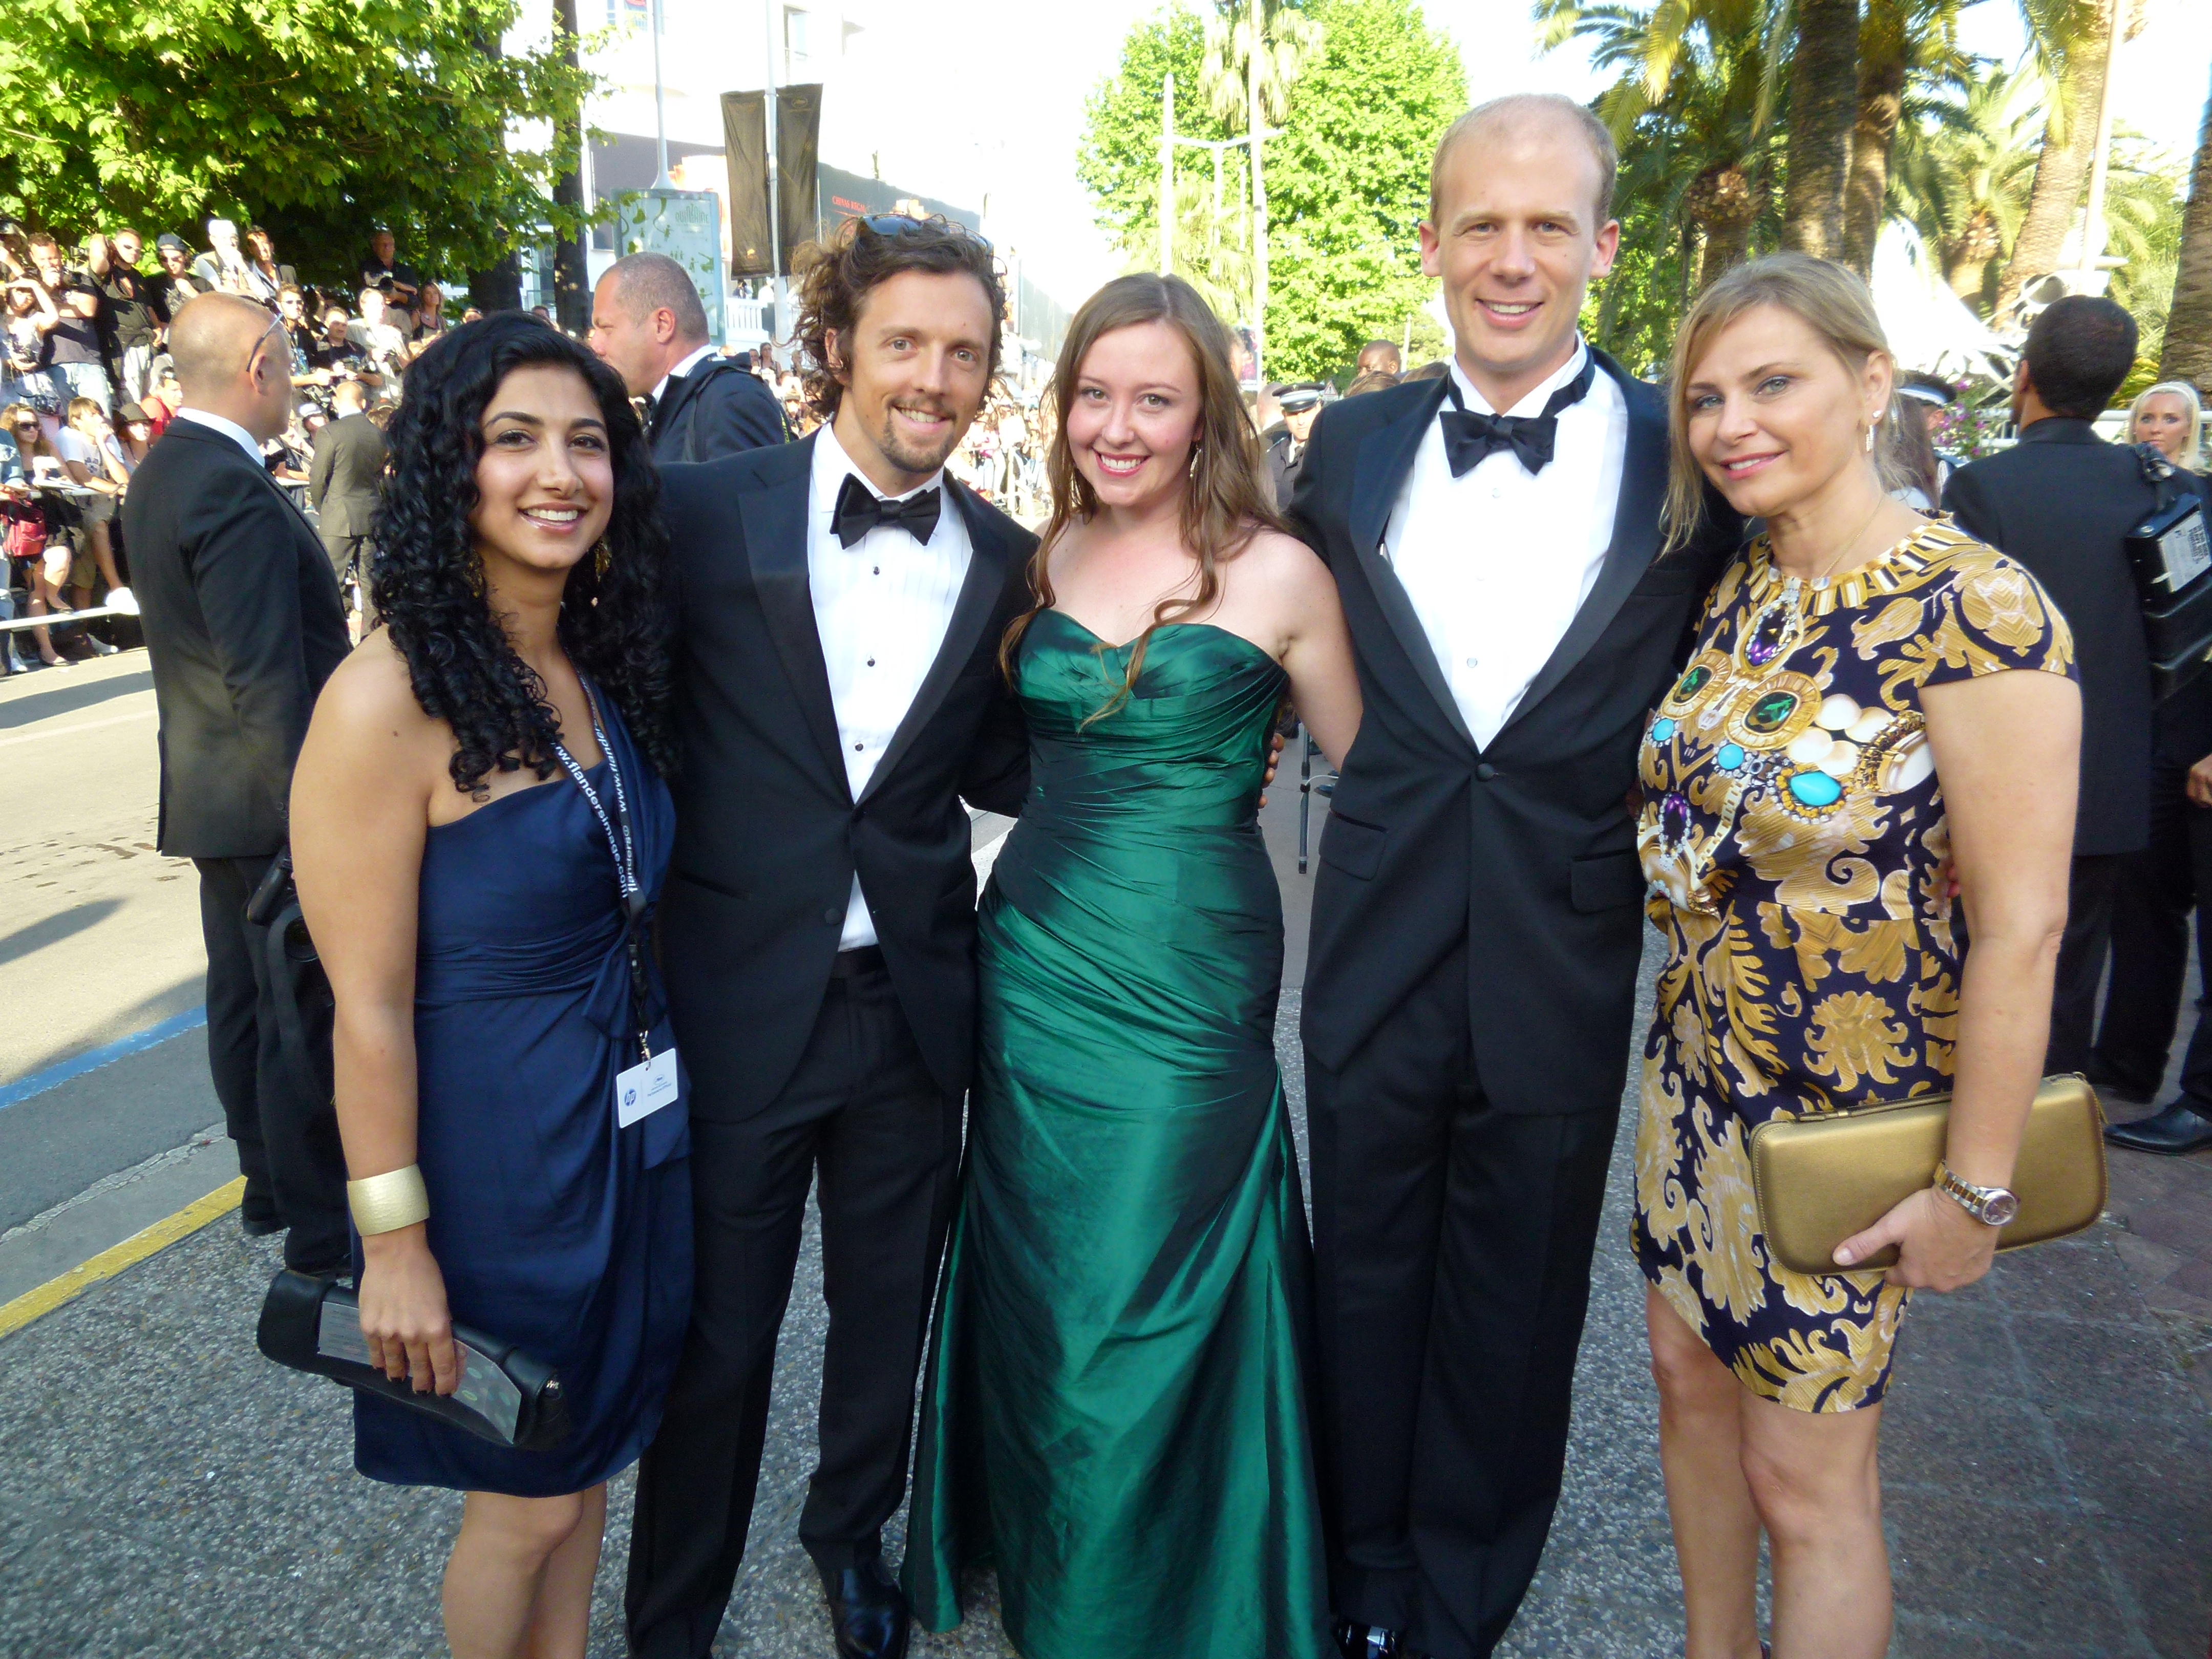 Josh Tickell with Rebecca Harrell Tickell and Jason Mraz at the premiere of 